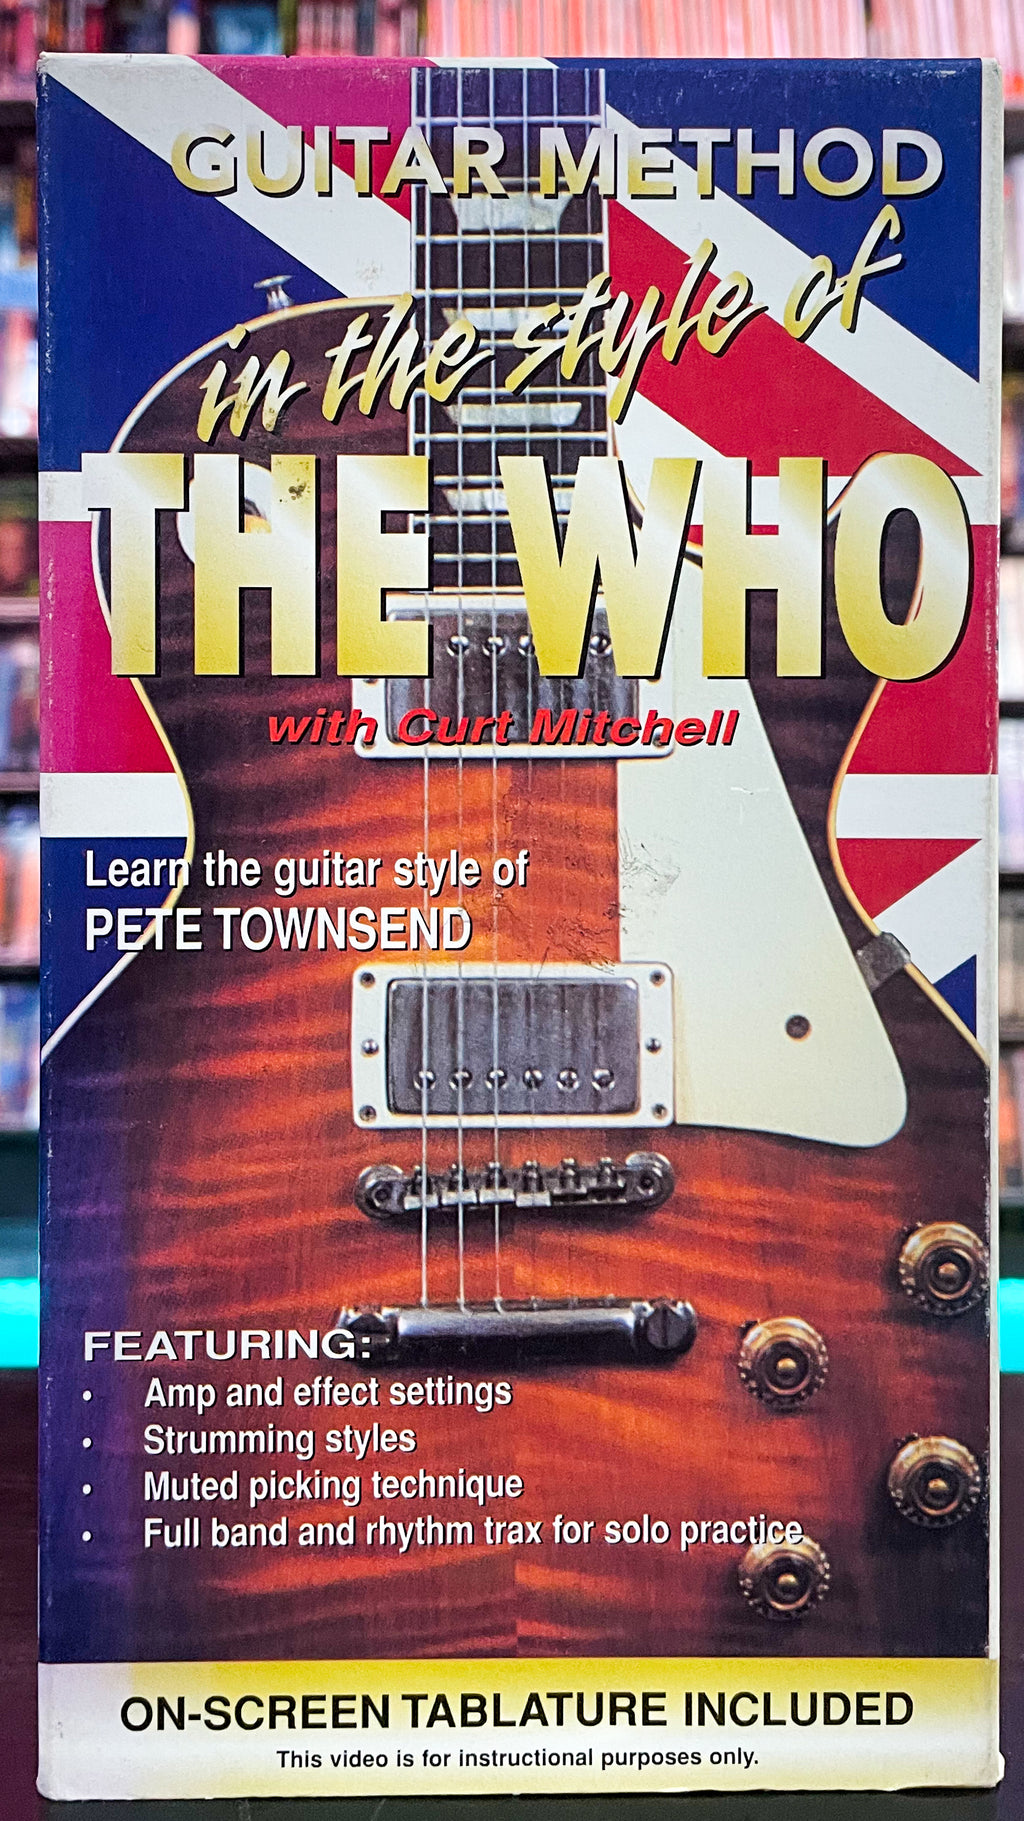 Guitar Method in the Stylle of The Who